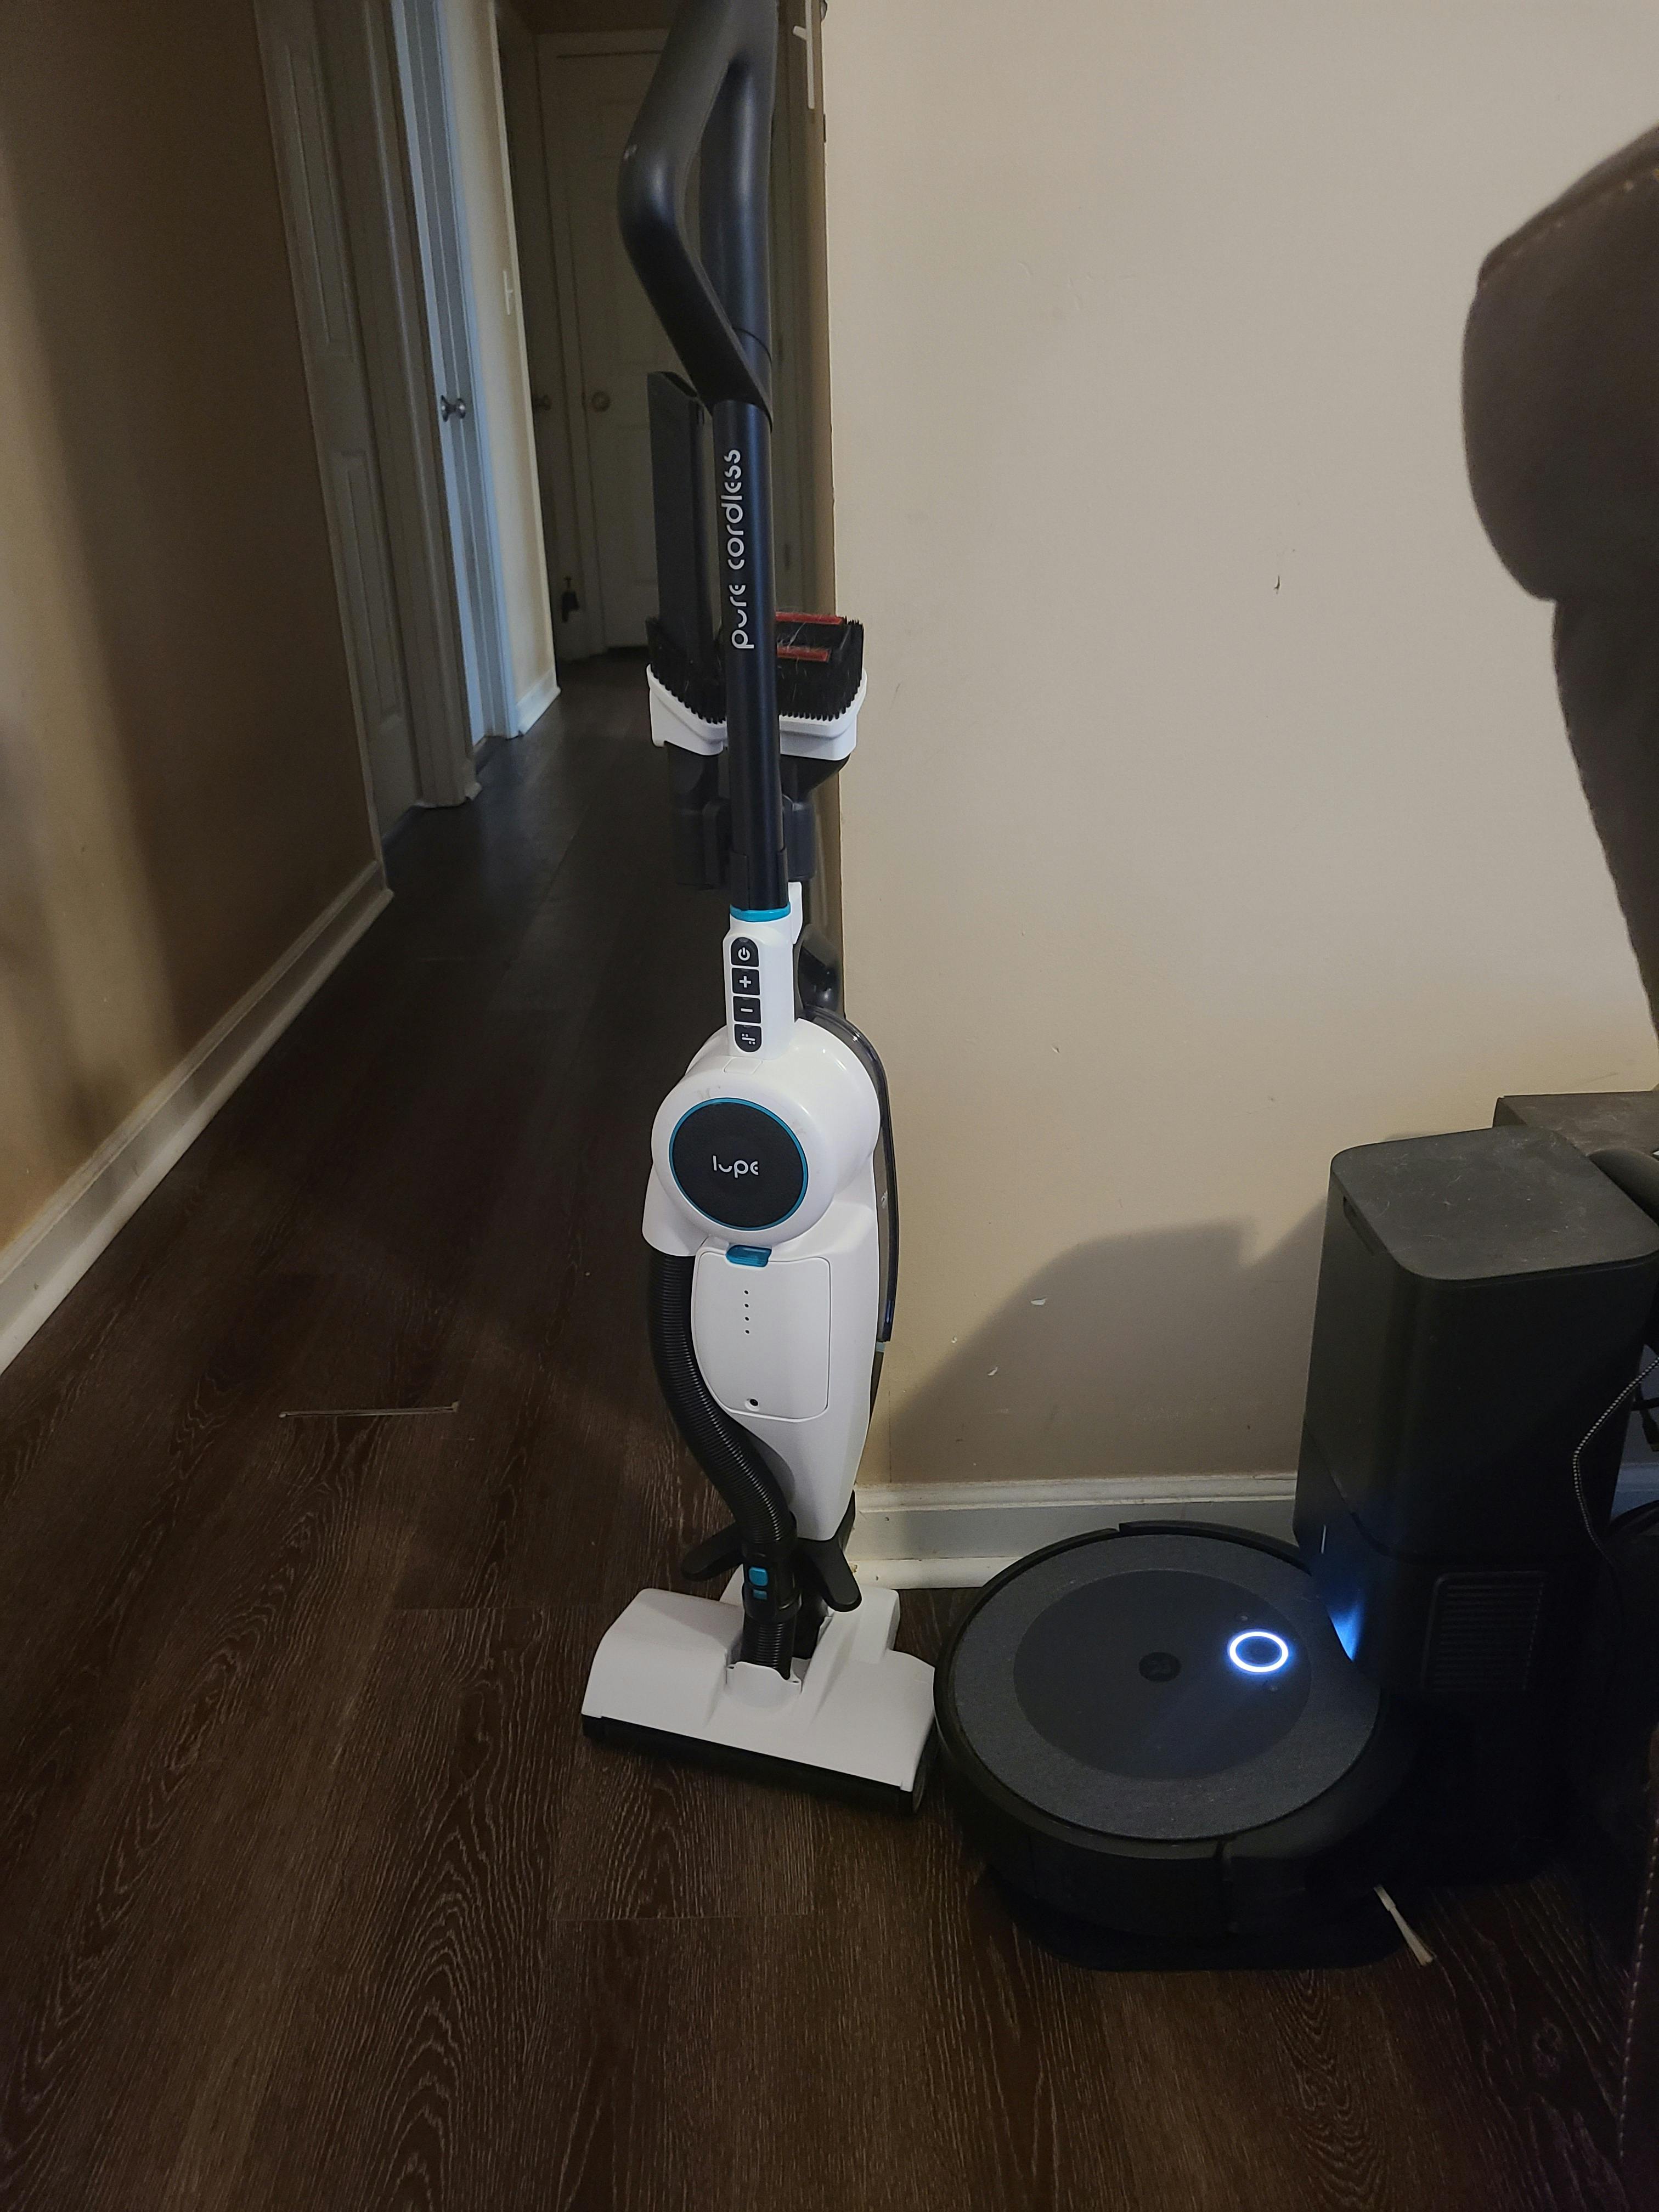 A Lupe Cordless Vacuum next to a Robot Vacuum. 